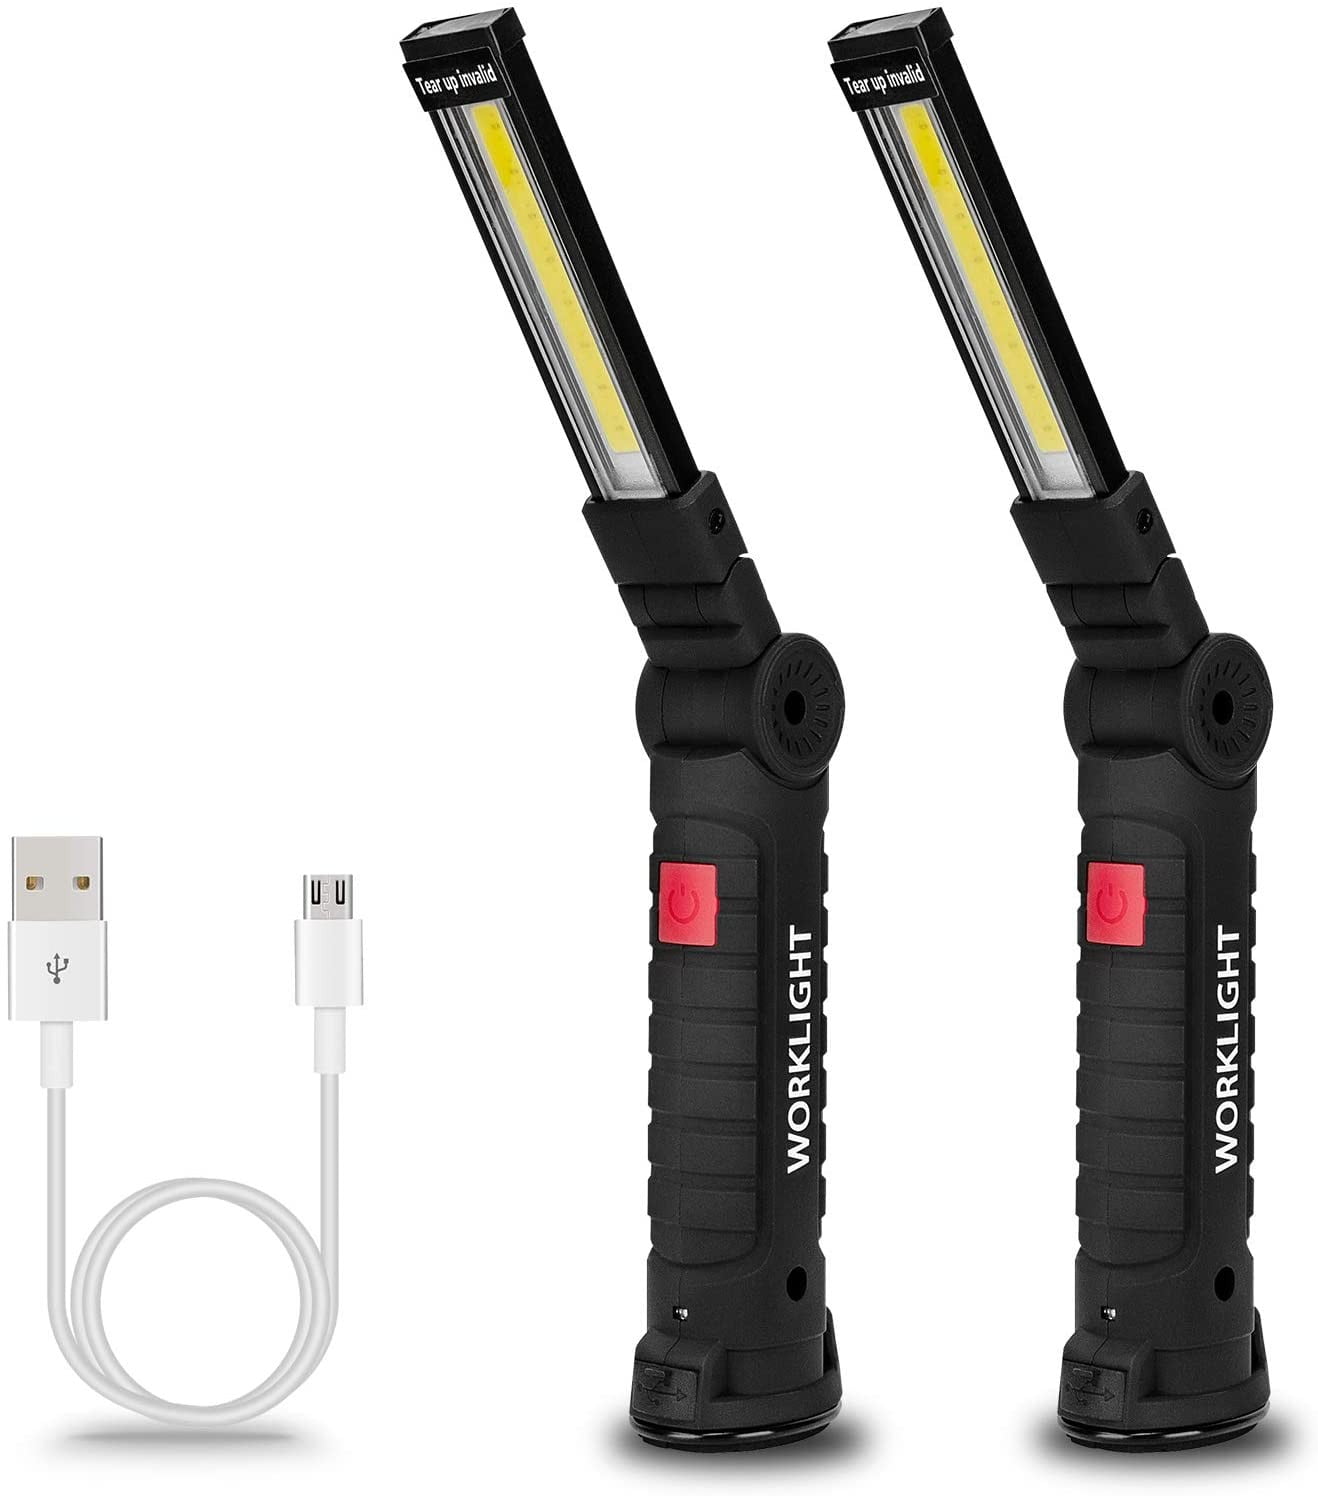 LED PORTABLE CORDLESS WORK LIGHT Flashlight with HANGER HOOK and Magnet Glow Max 